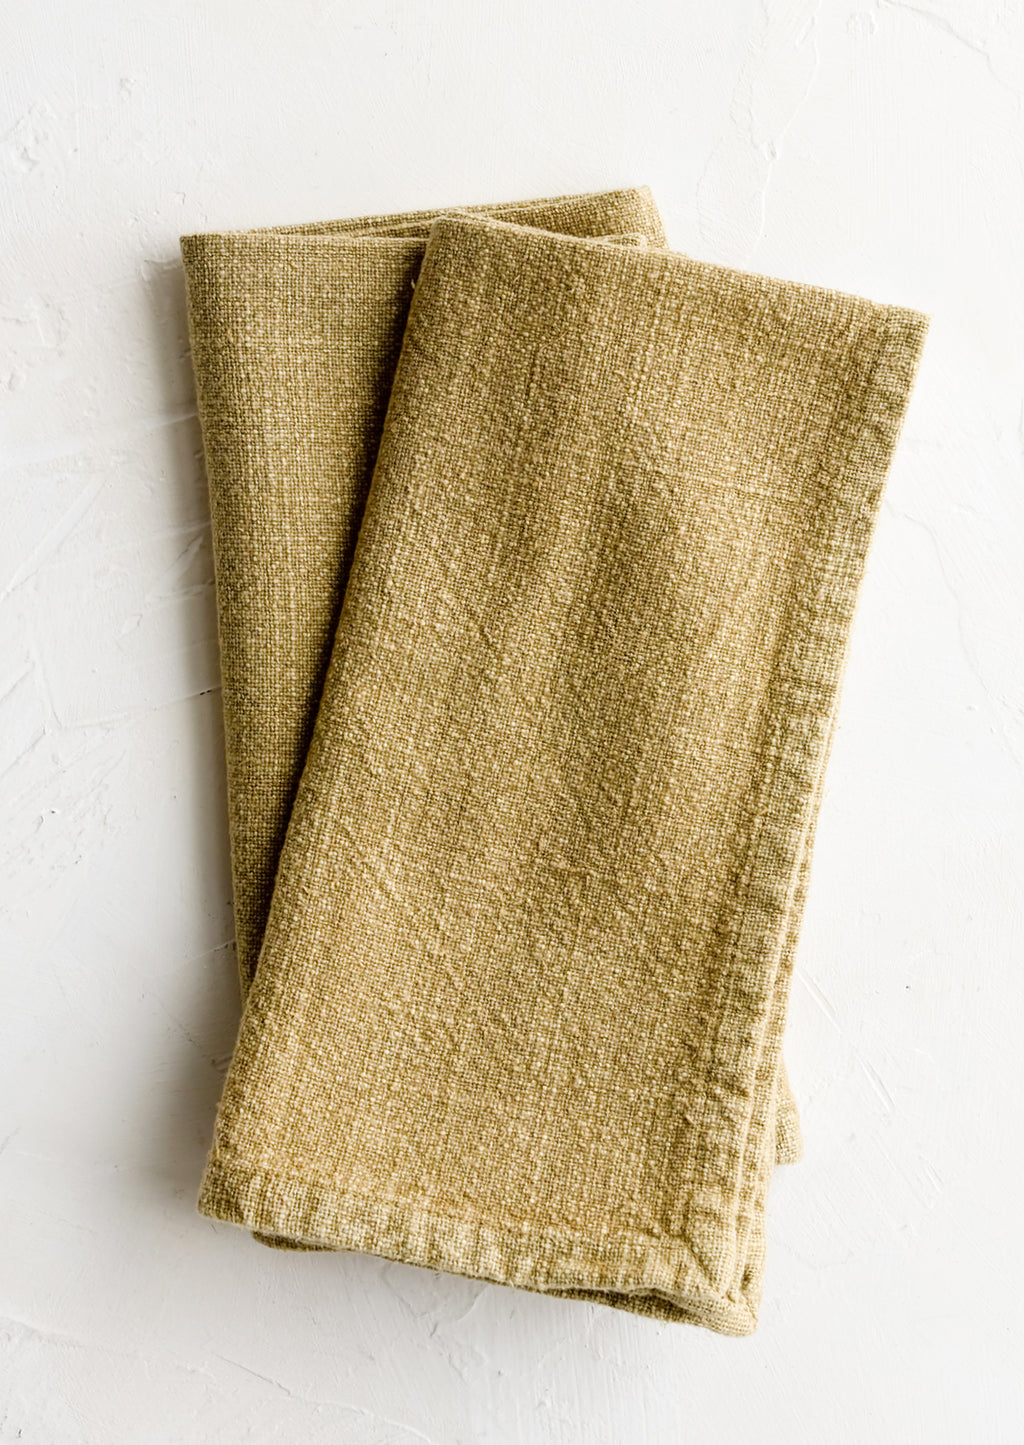 Wheat: A pair of stonewashed napkins in wheat.